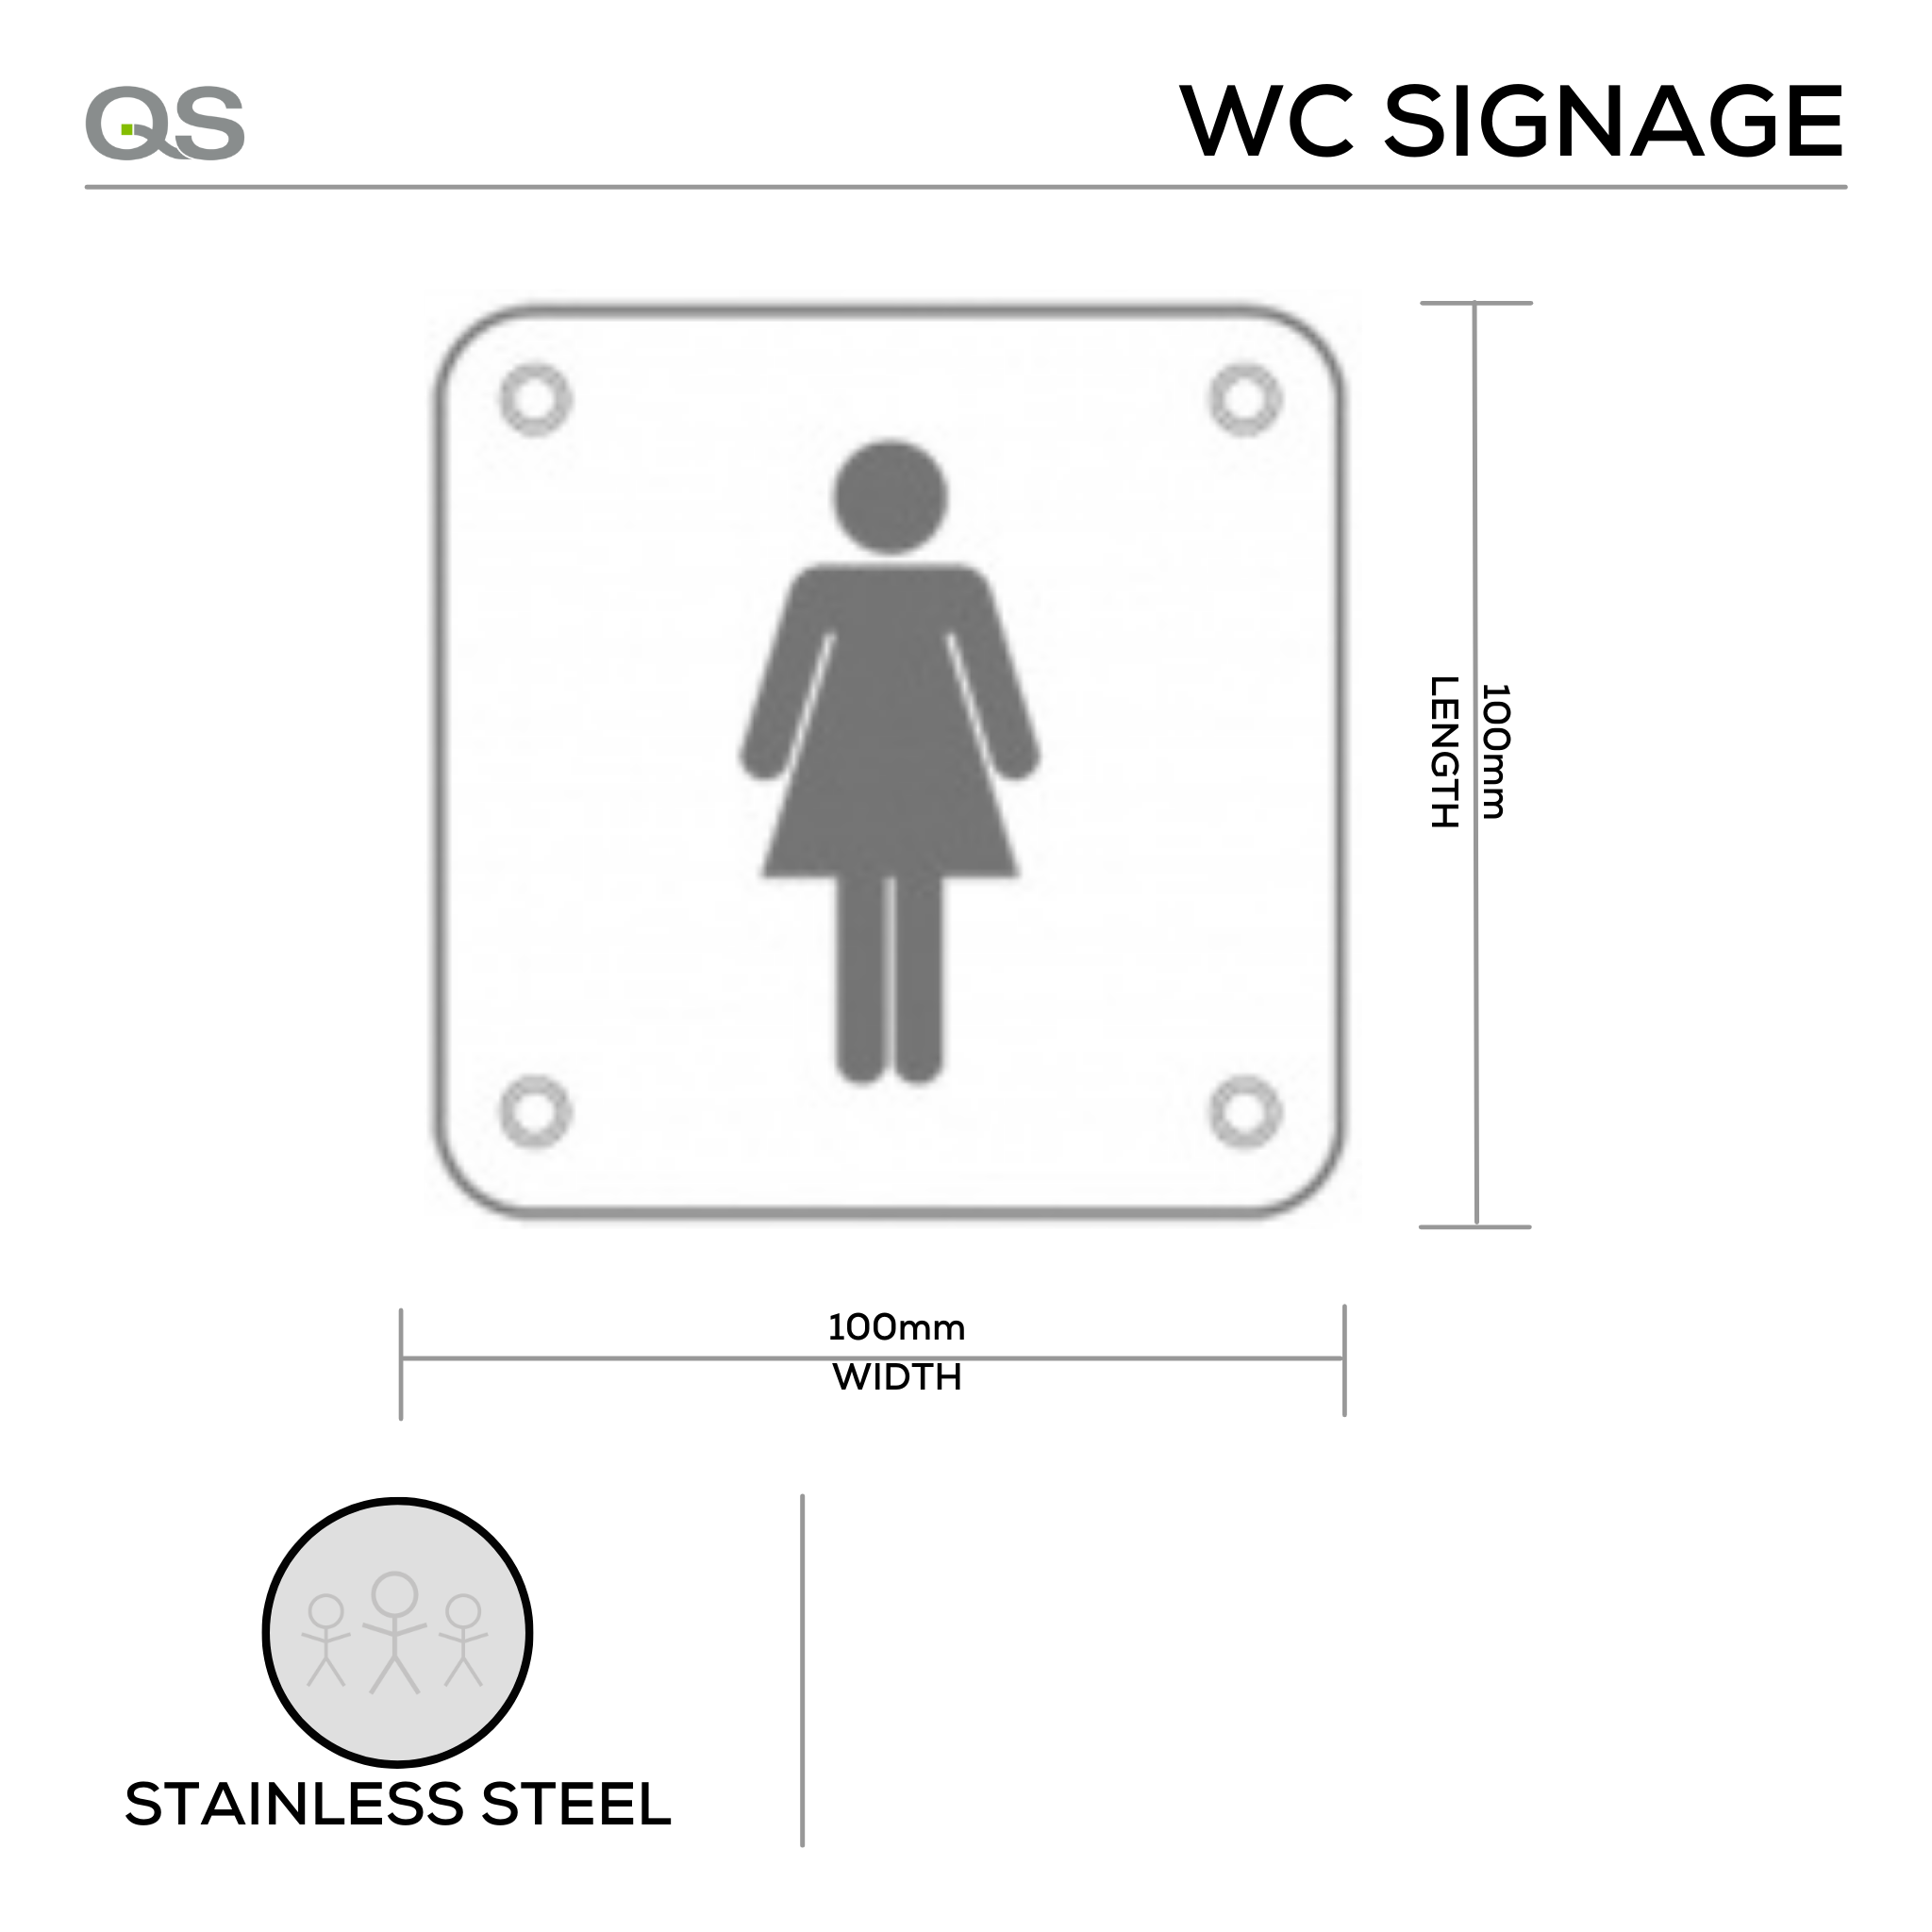 Female, Square Engraved Sign, 100mm x 100mm, Stainless Steel, QS